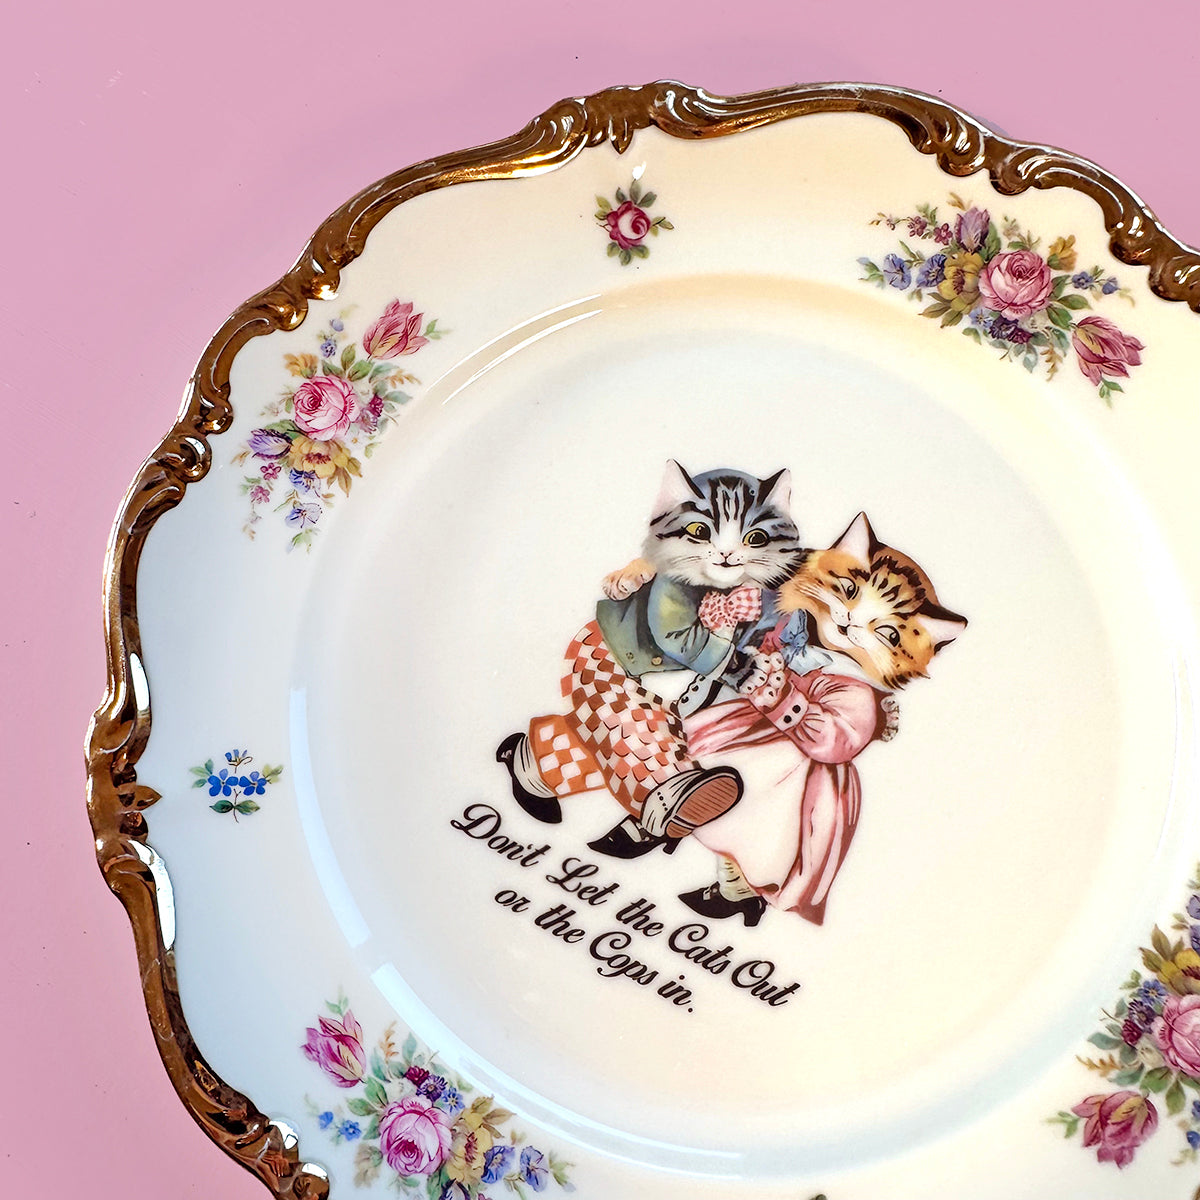 Vintage Art Plate - Cat plate - "Don't let the Cats Out or the Cops in."